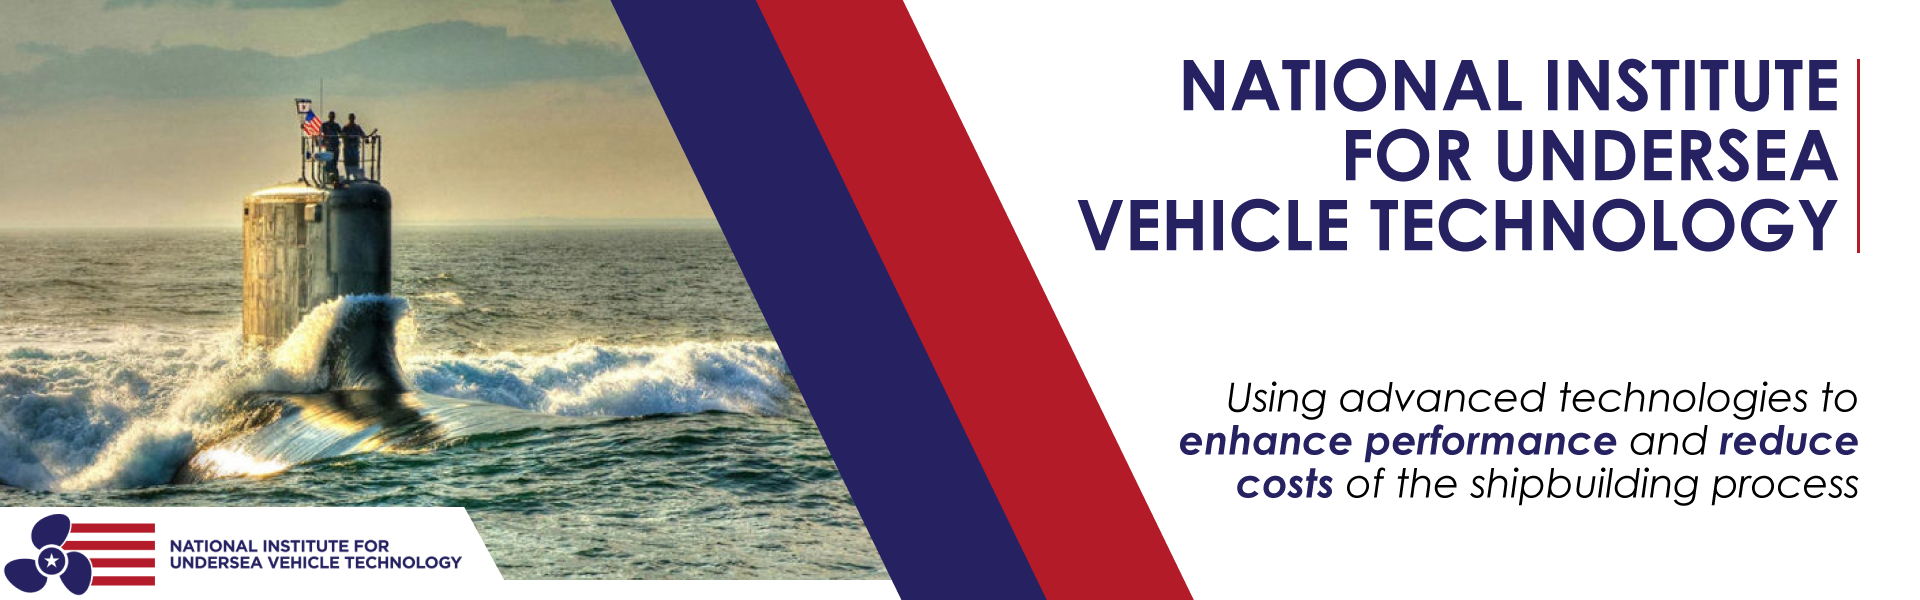 ational Institute for Undersea Vehicle Technology